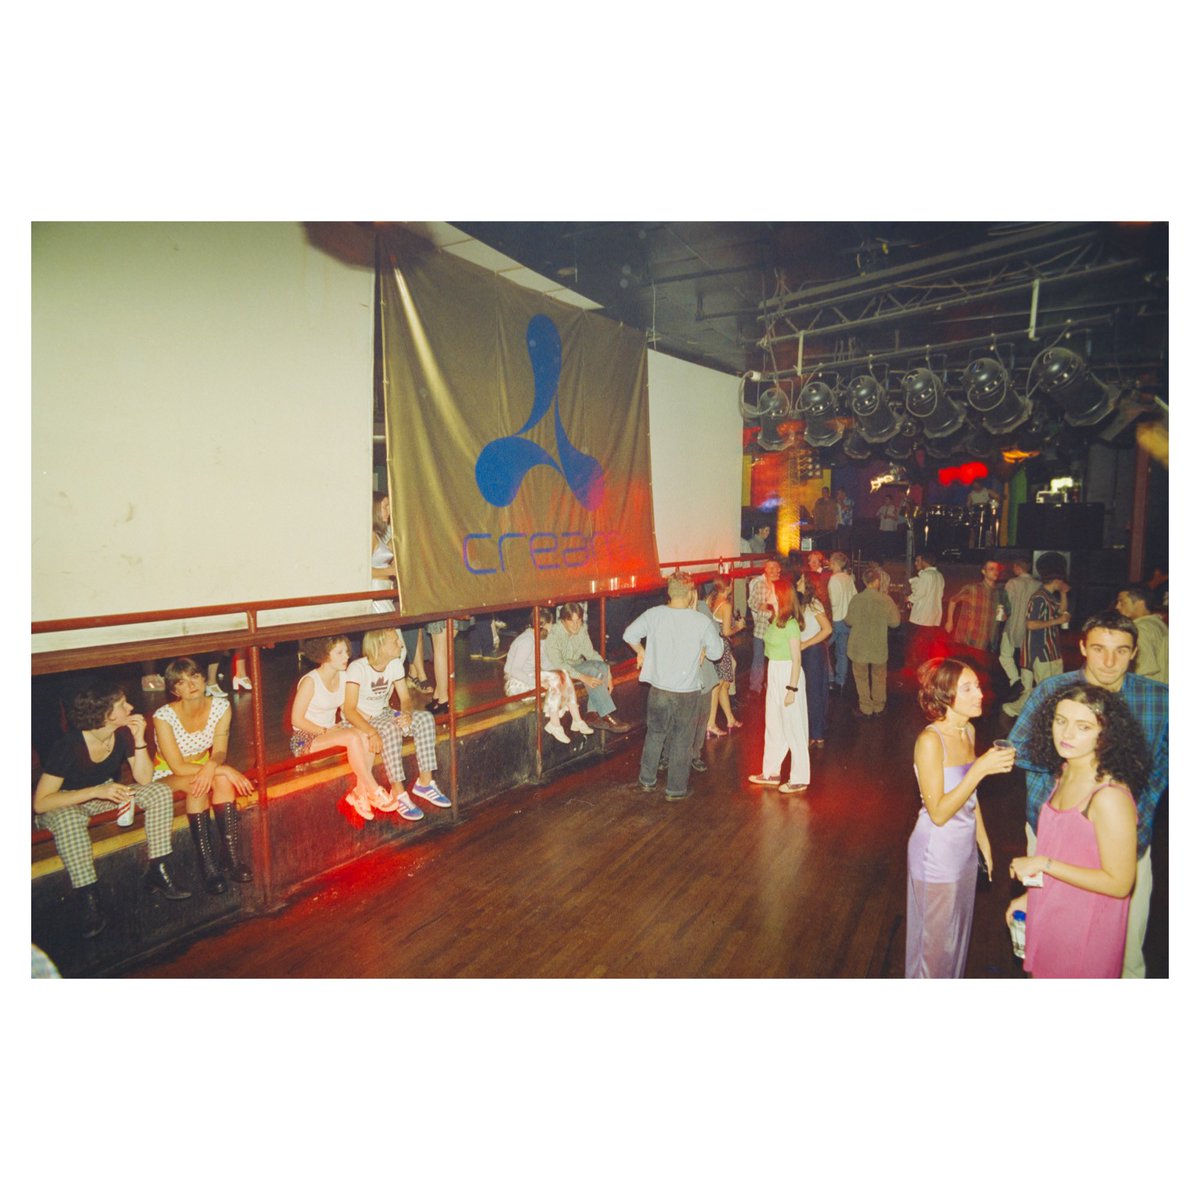 Early doors at Cream, Liverpool, 1995.